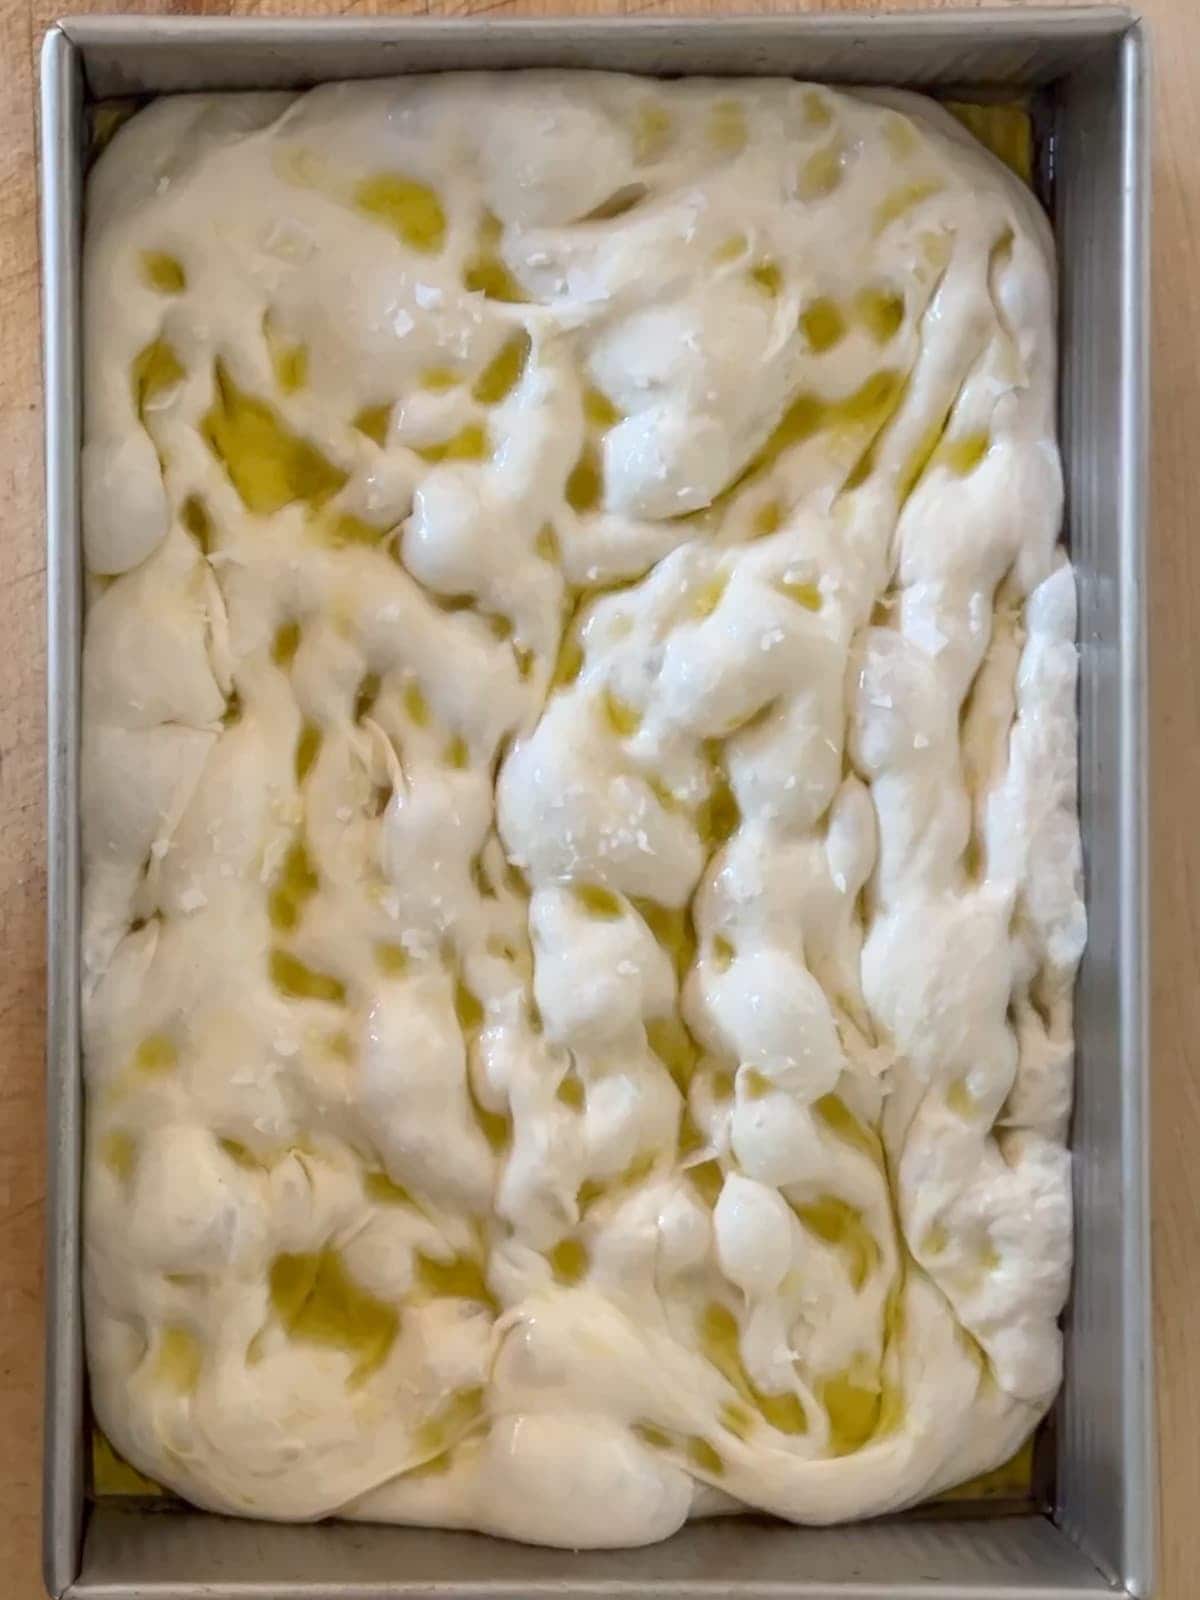 focaccia dough with flakey salt and olive oil added just before baking